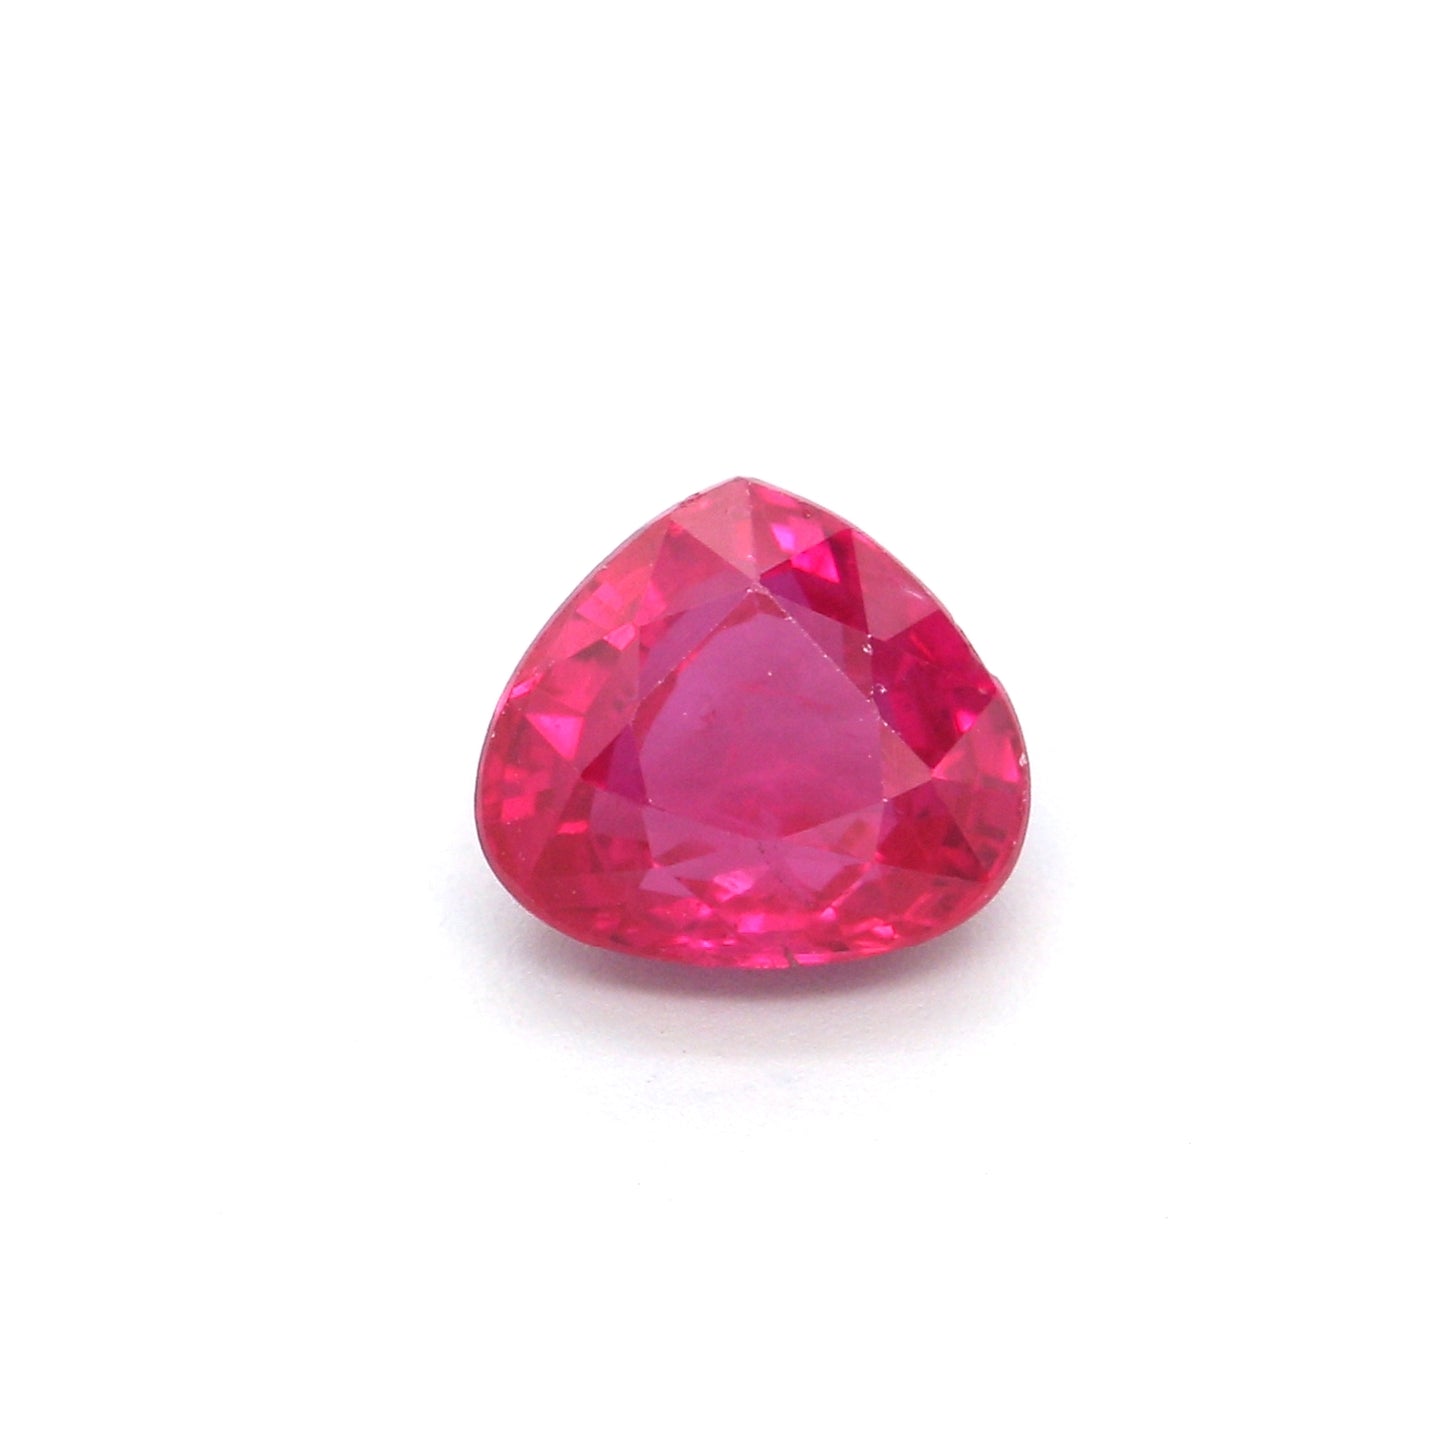 0.95ct Pinkish Red, Pear Shape Ruby, H(a), Myanmar - 5.42 x 6.10 x 3.42mm